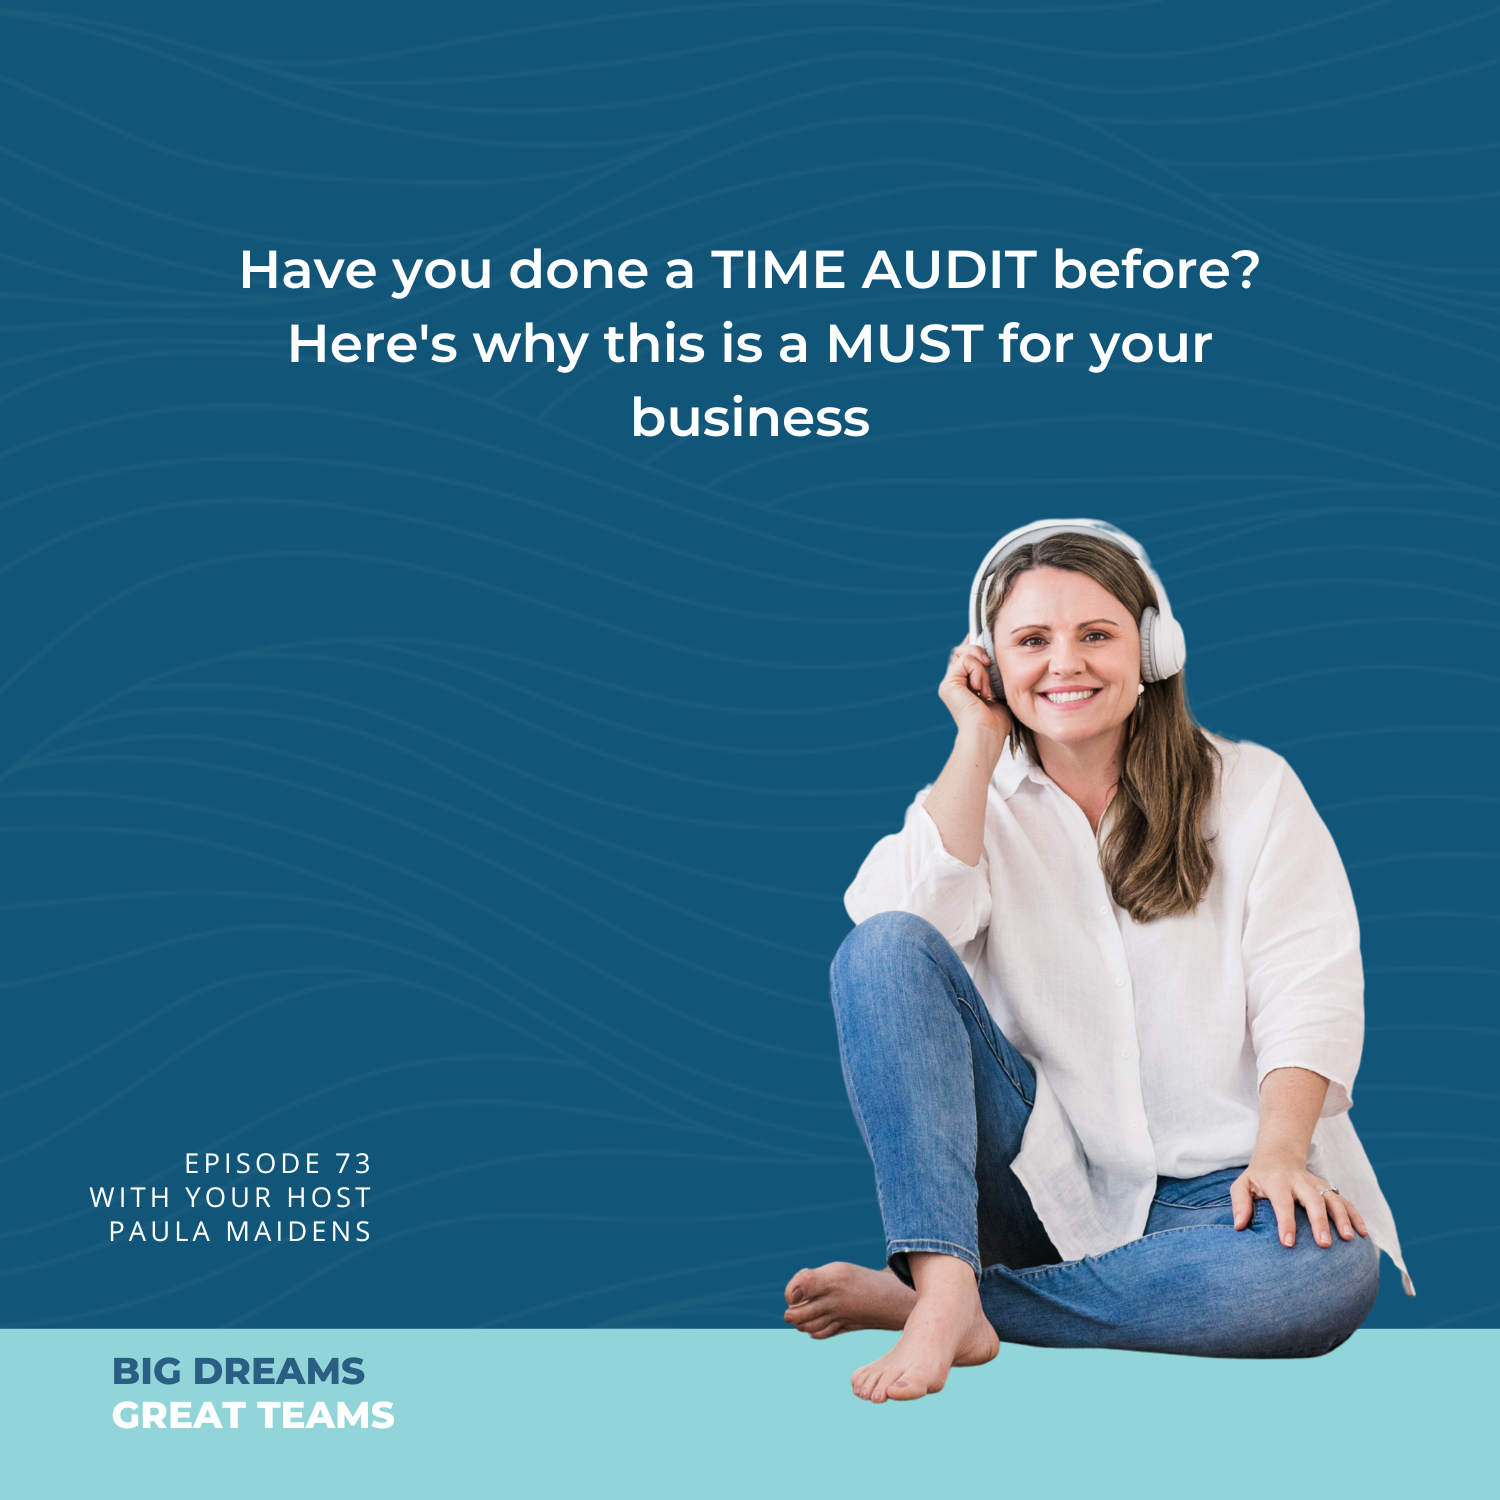 Have you done a TIME AUDIT before? Here's why this is a MUST for your business